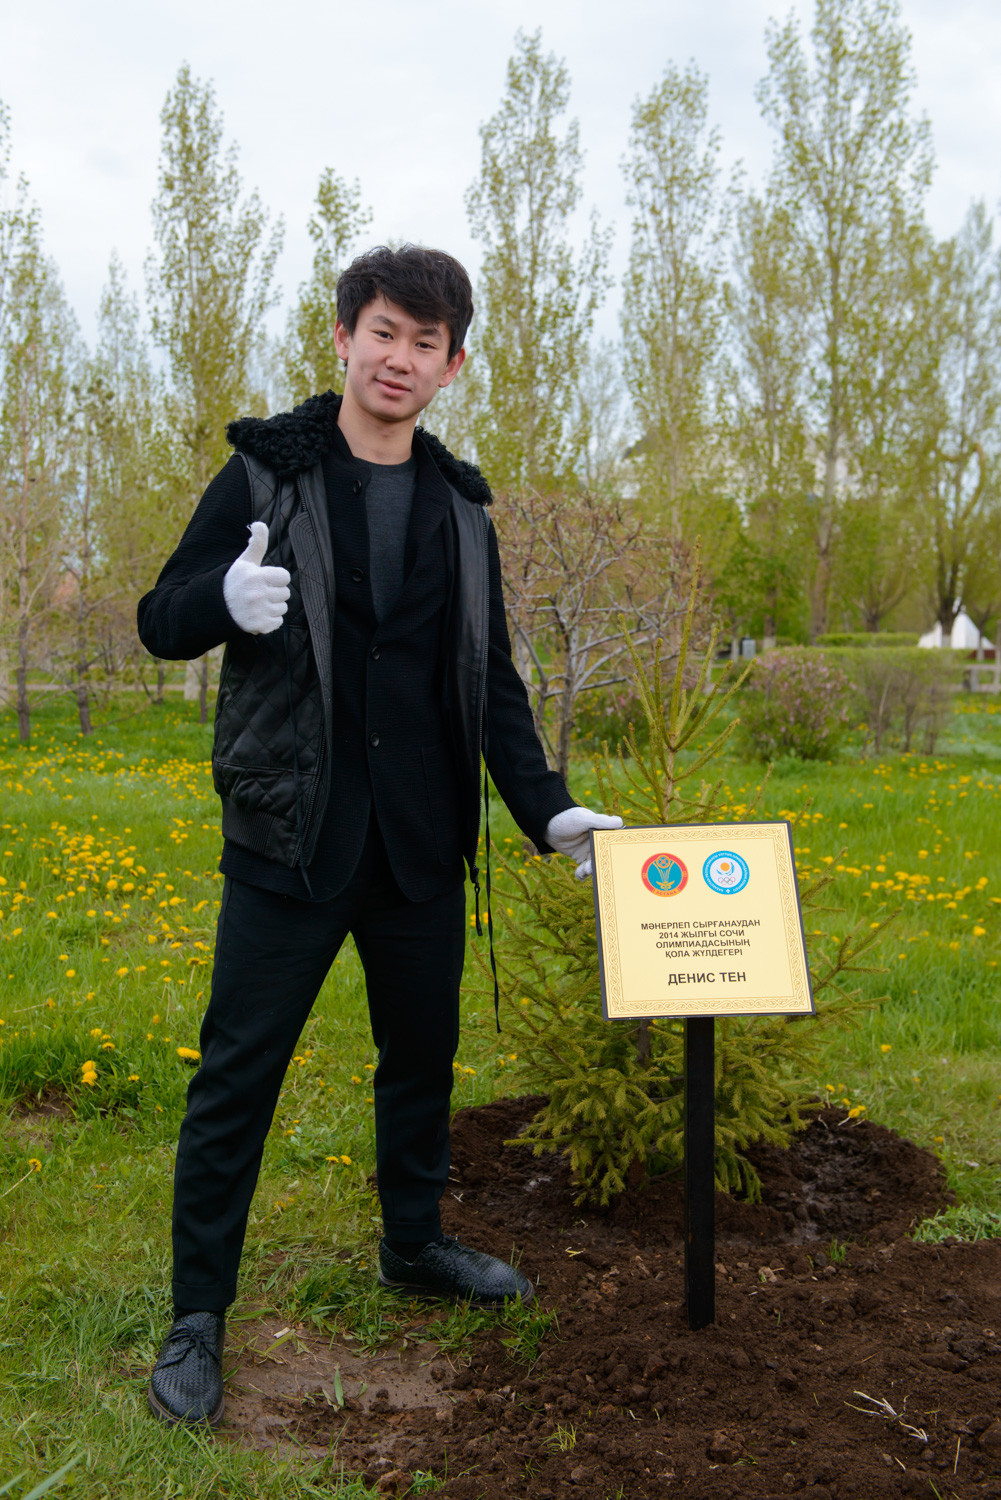 The initiative is backed by the National Olympic Committee of Kazakhstan ©NOCK